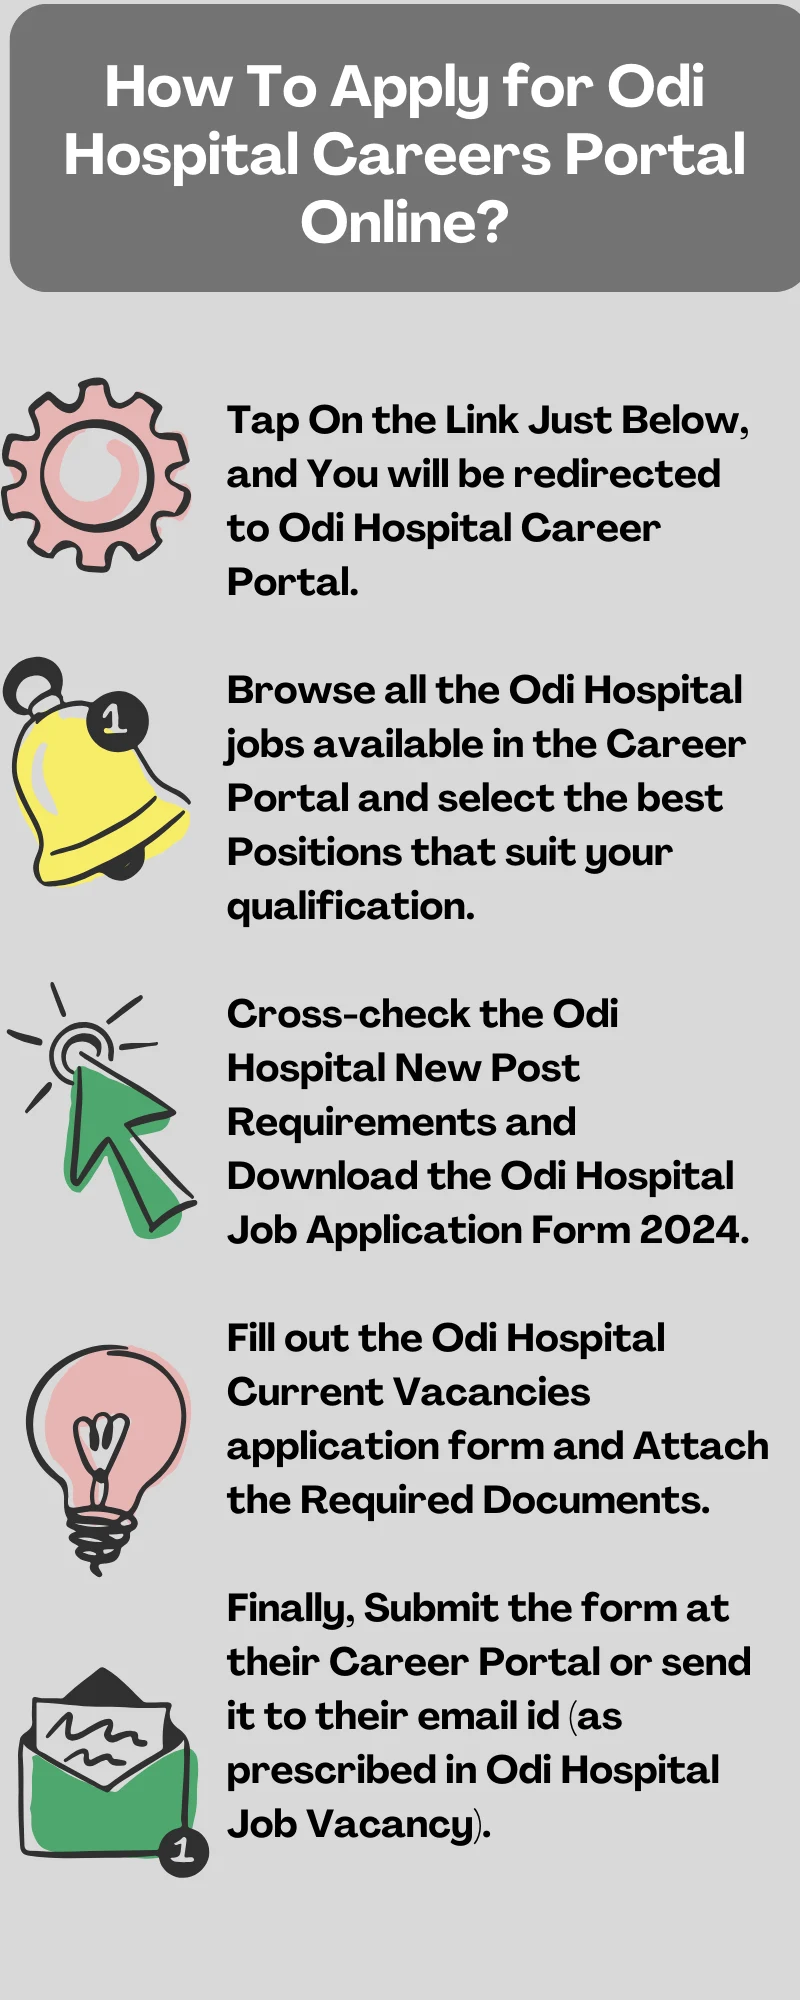 How To Apply for Odi Hospital Careers Portal Online?